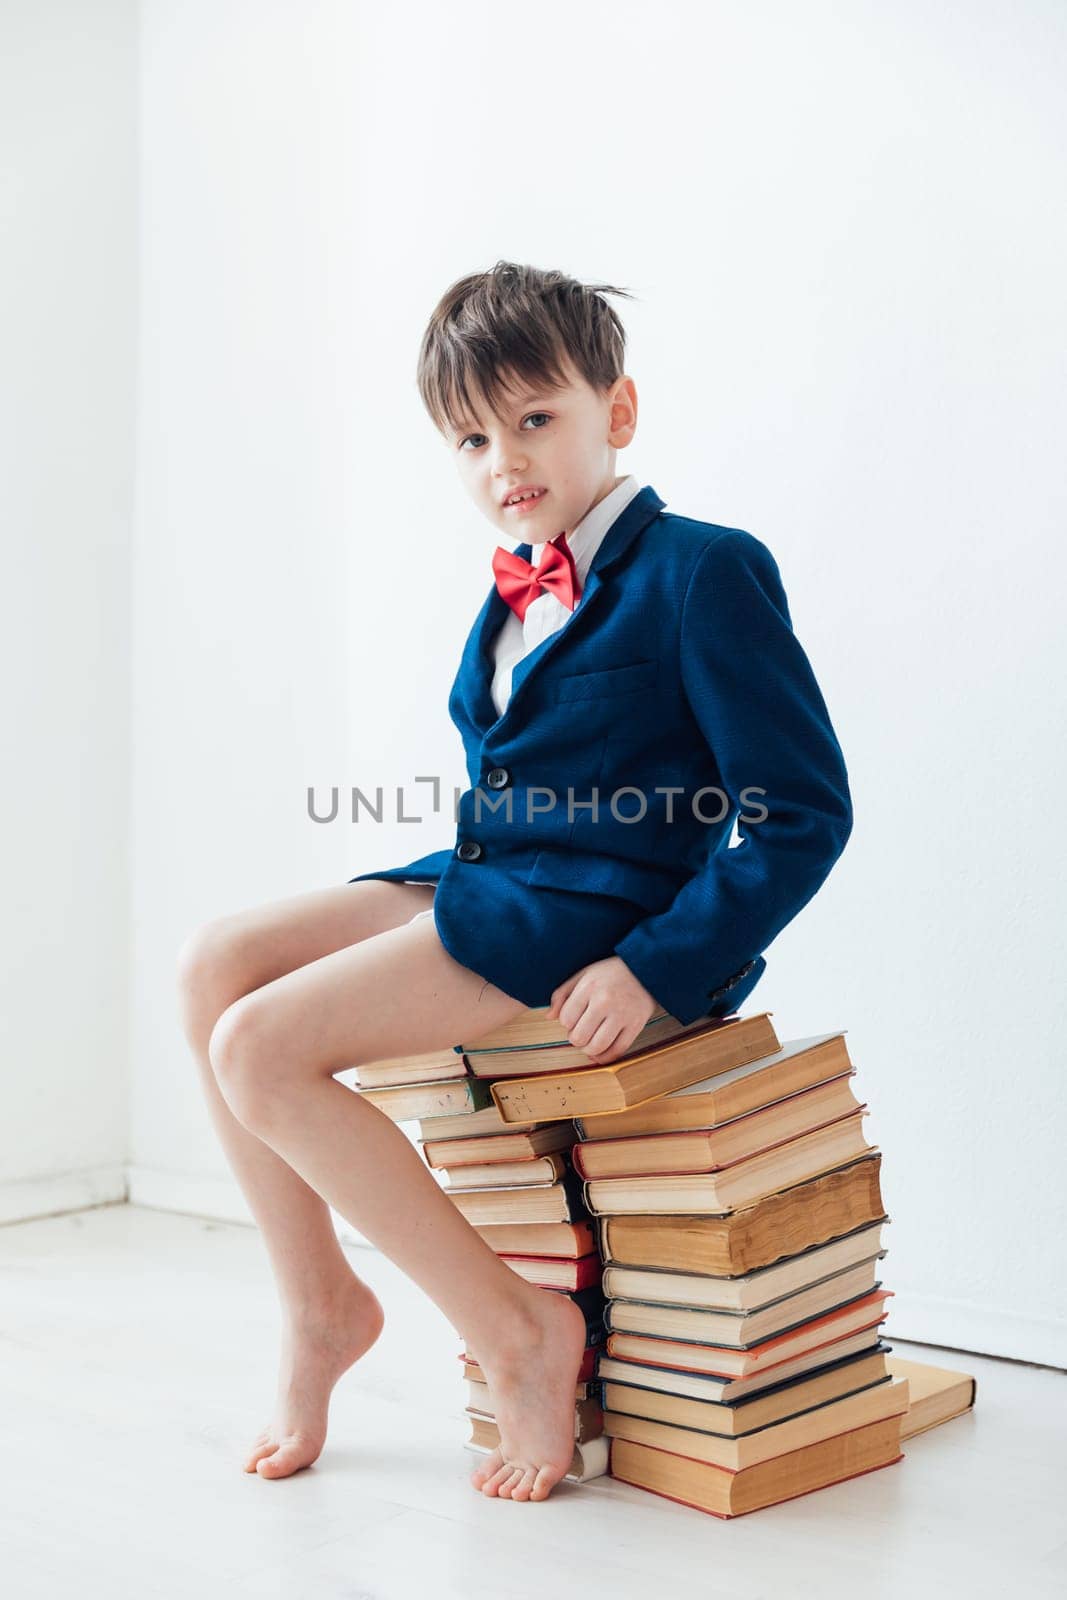 a child sitting on books gets knowledge learning reading science